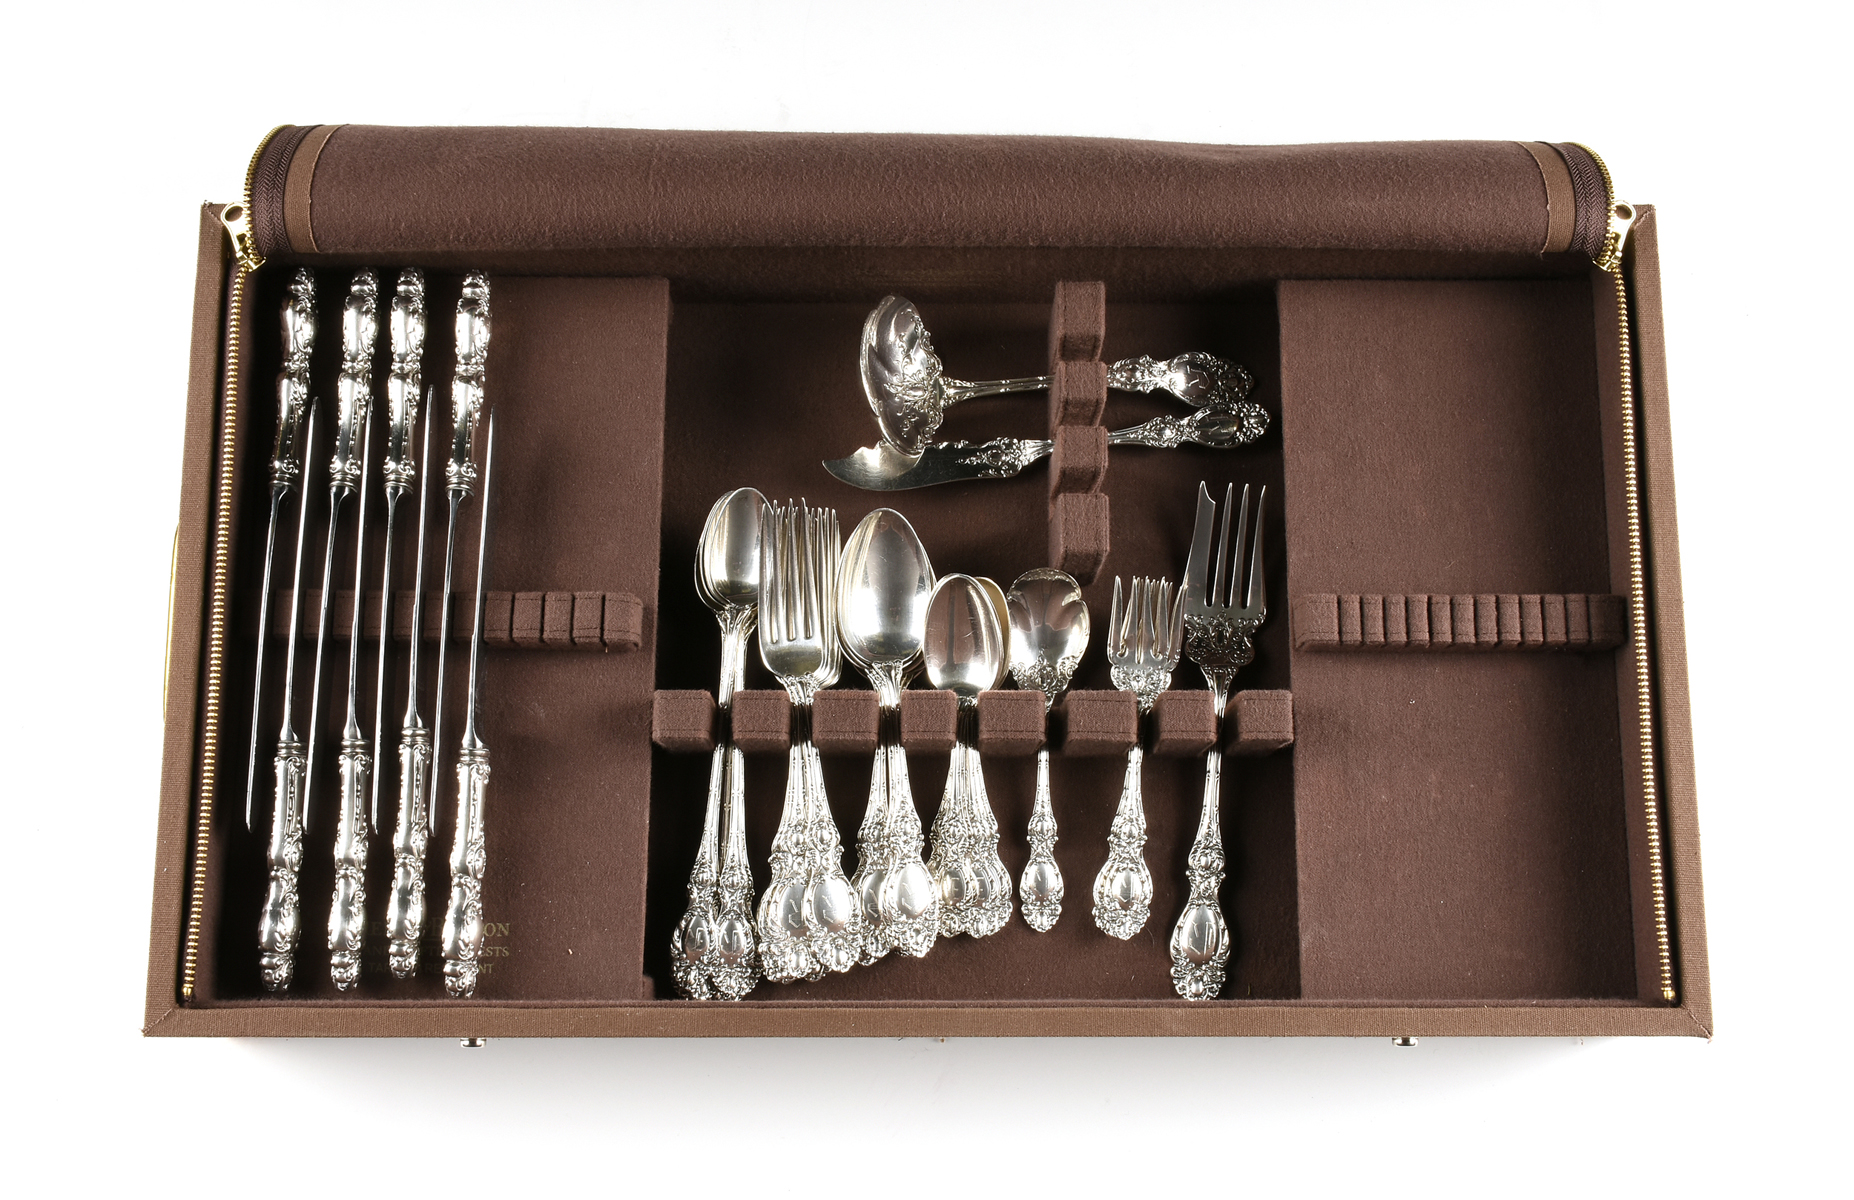 A FORTY-NINE PIECE R. WALLACE & SONS STERLING SILVER FLATWARE SERVICE, LUCERNE PATTERN, MARKED, - Image 2 of 5